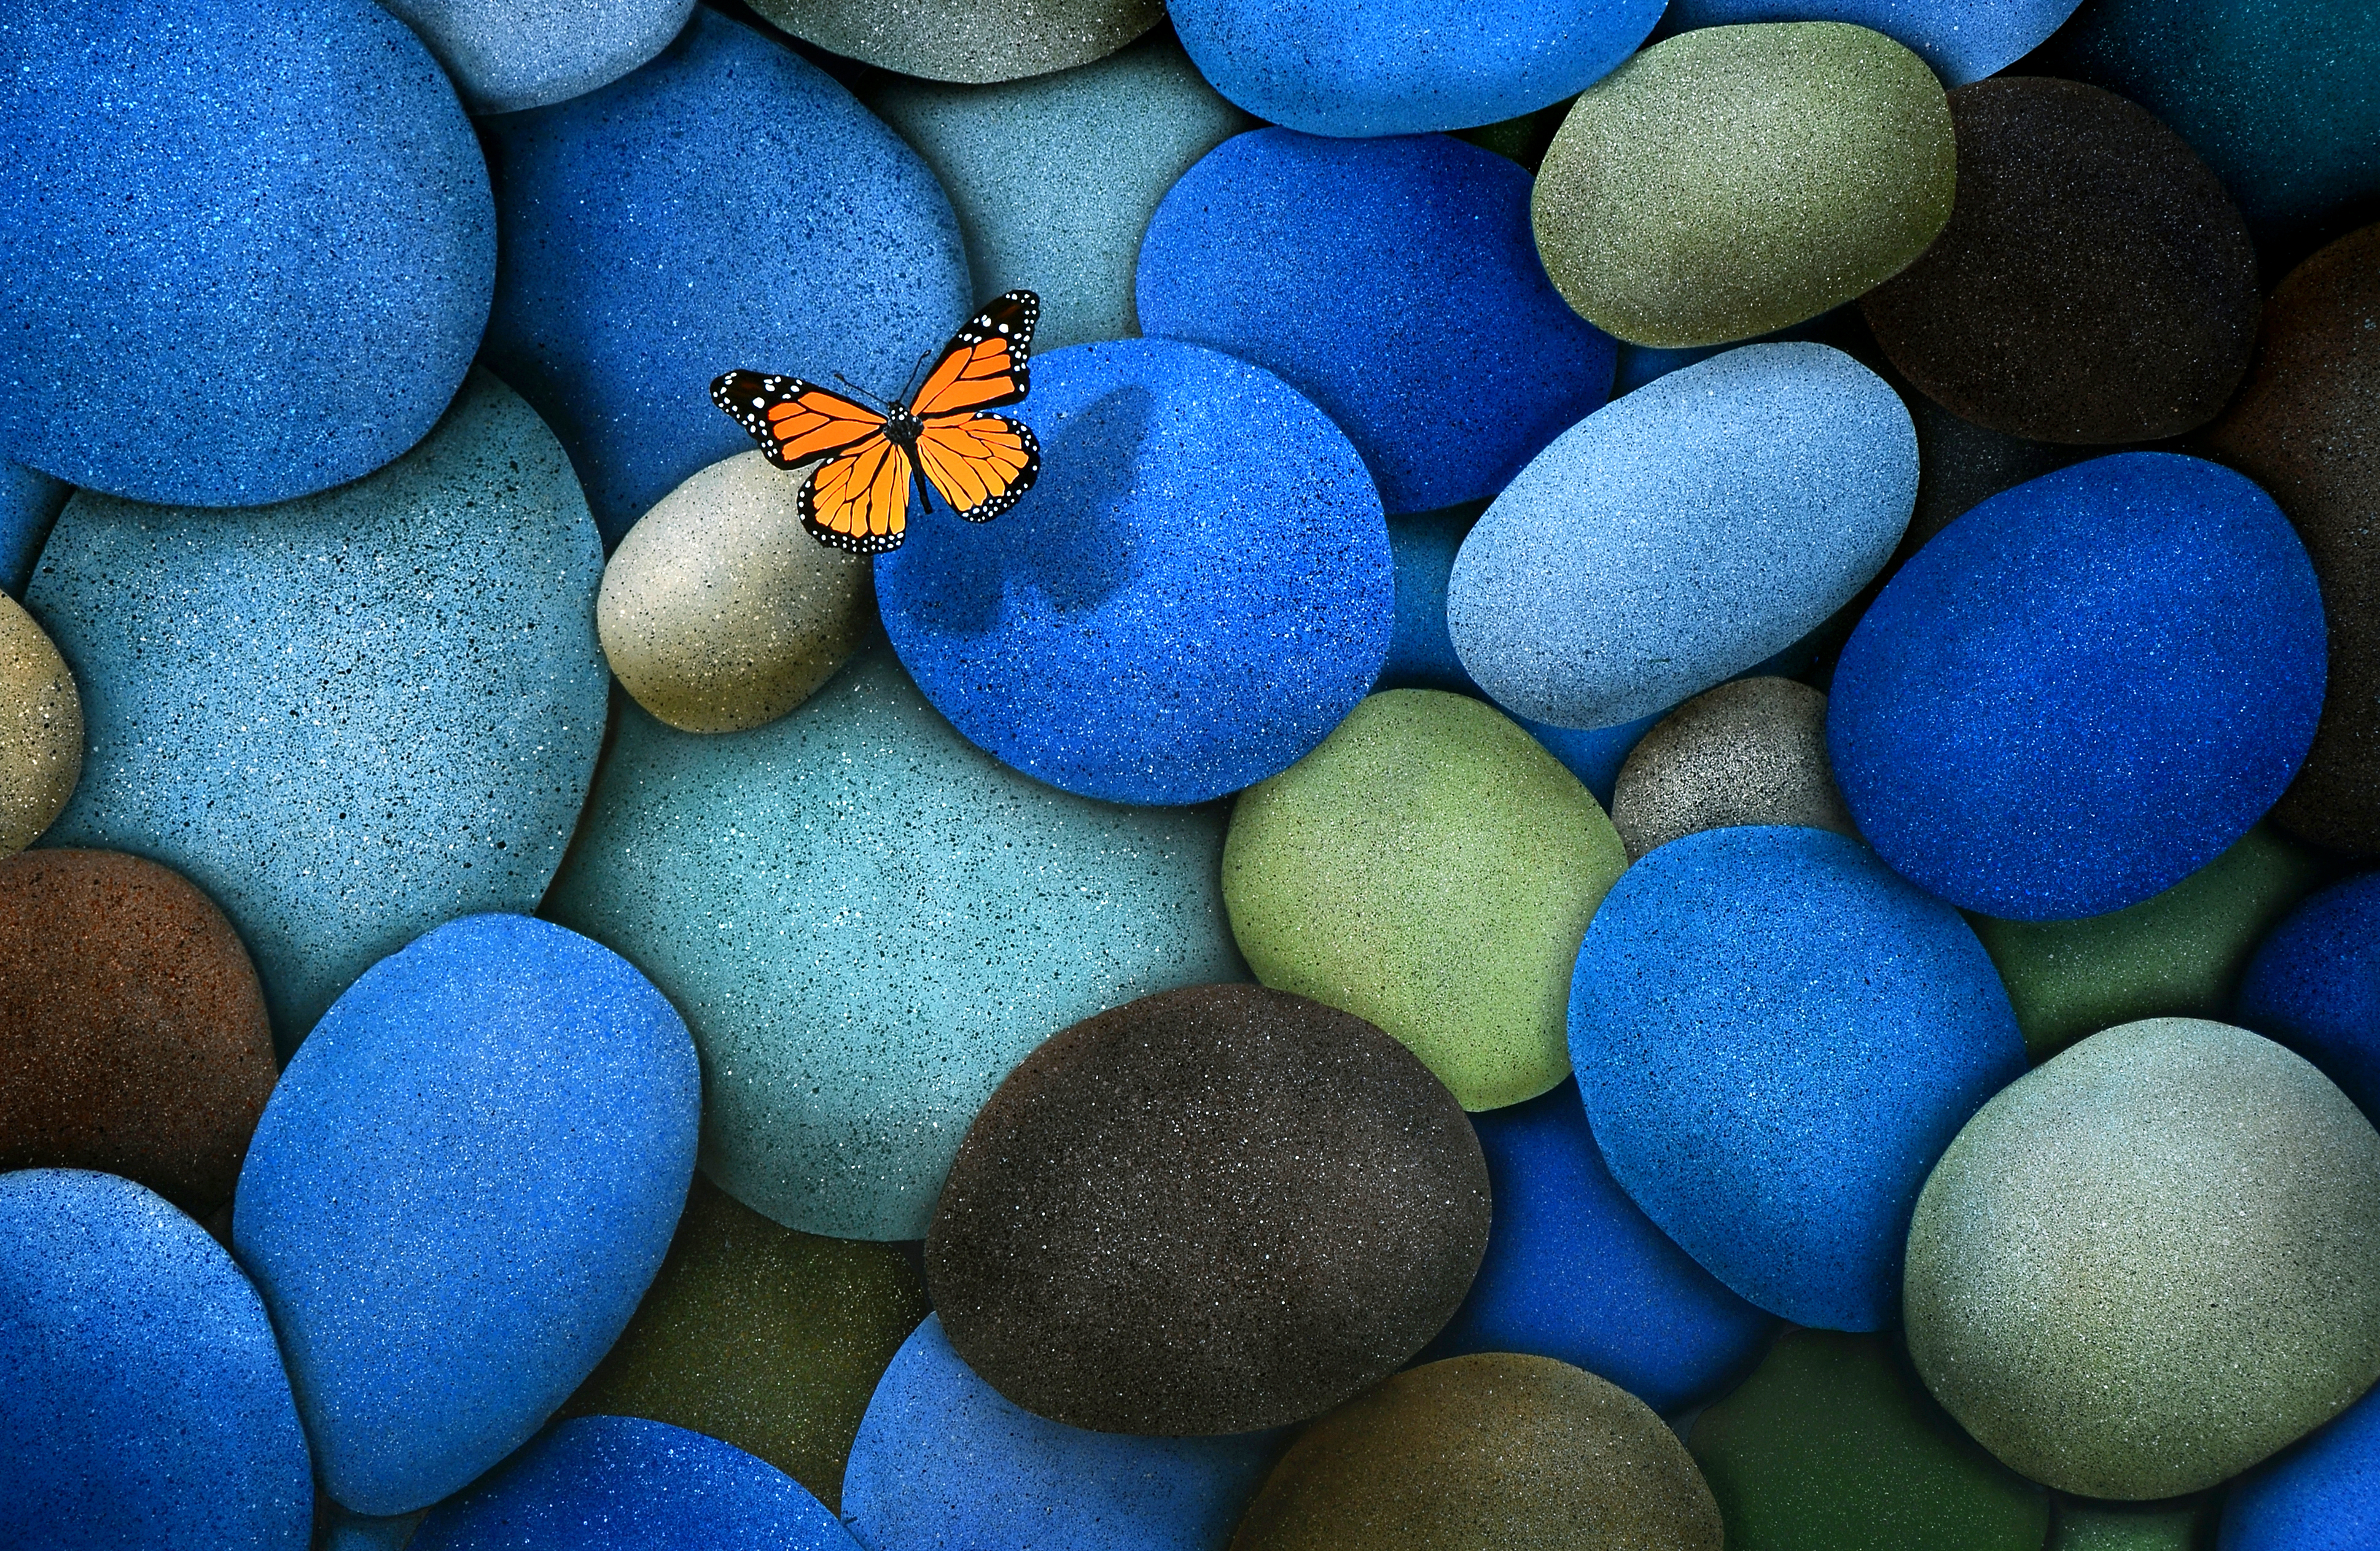 High Resolution Stone Blue and Butterfly Wallpaper Full Size ...